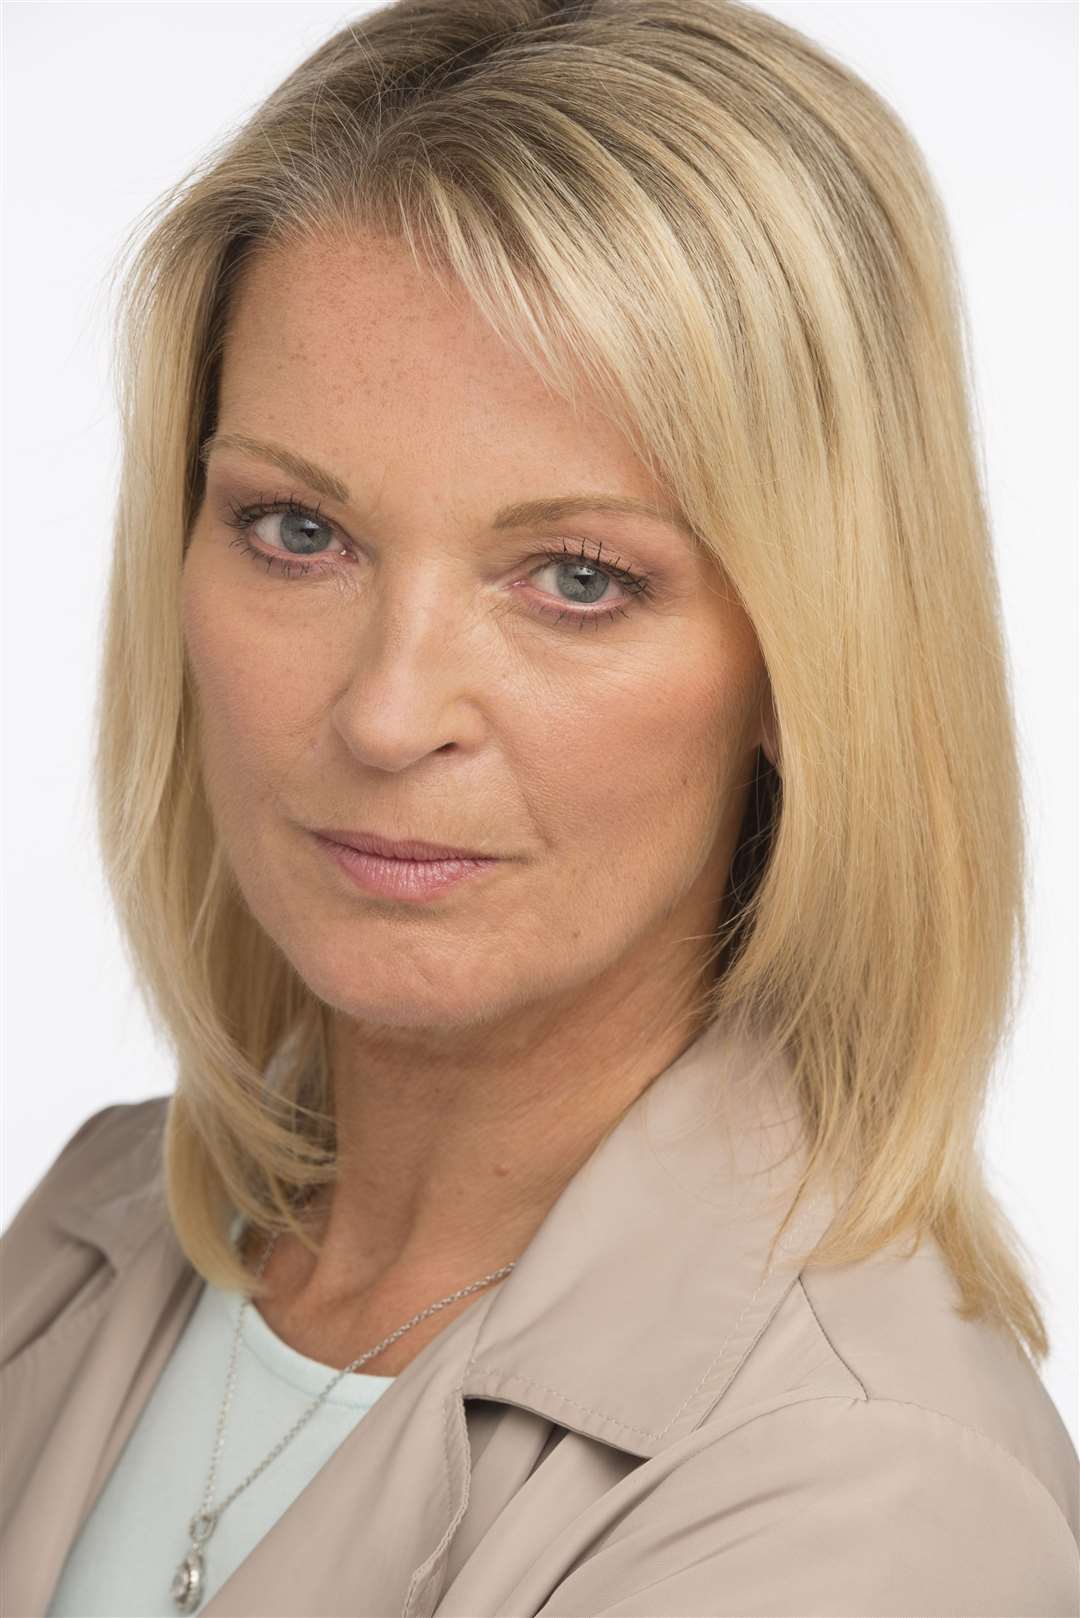 Eastenders star Gillian Taylforth will be among celebs at Back on Track at Buckmore Park. (c) bbc - photographer: des willie fm4041117 (15823794)